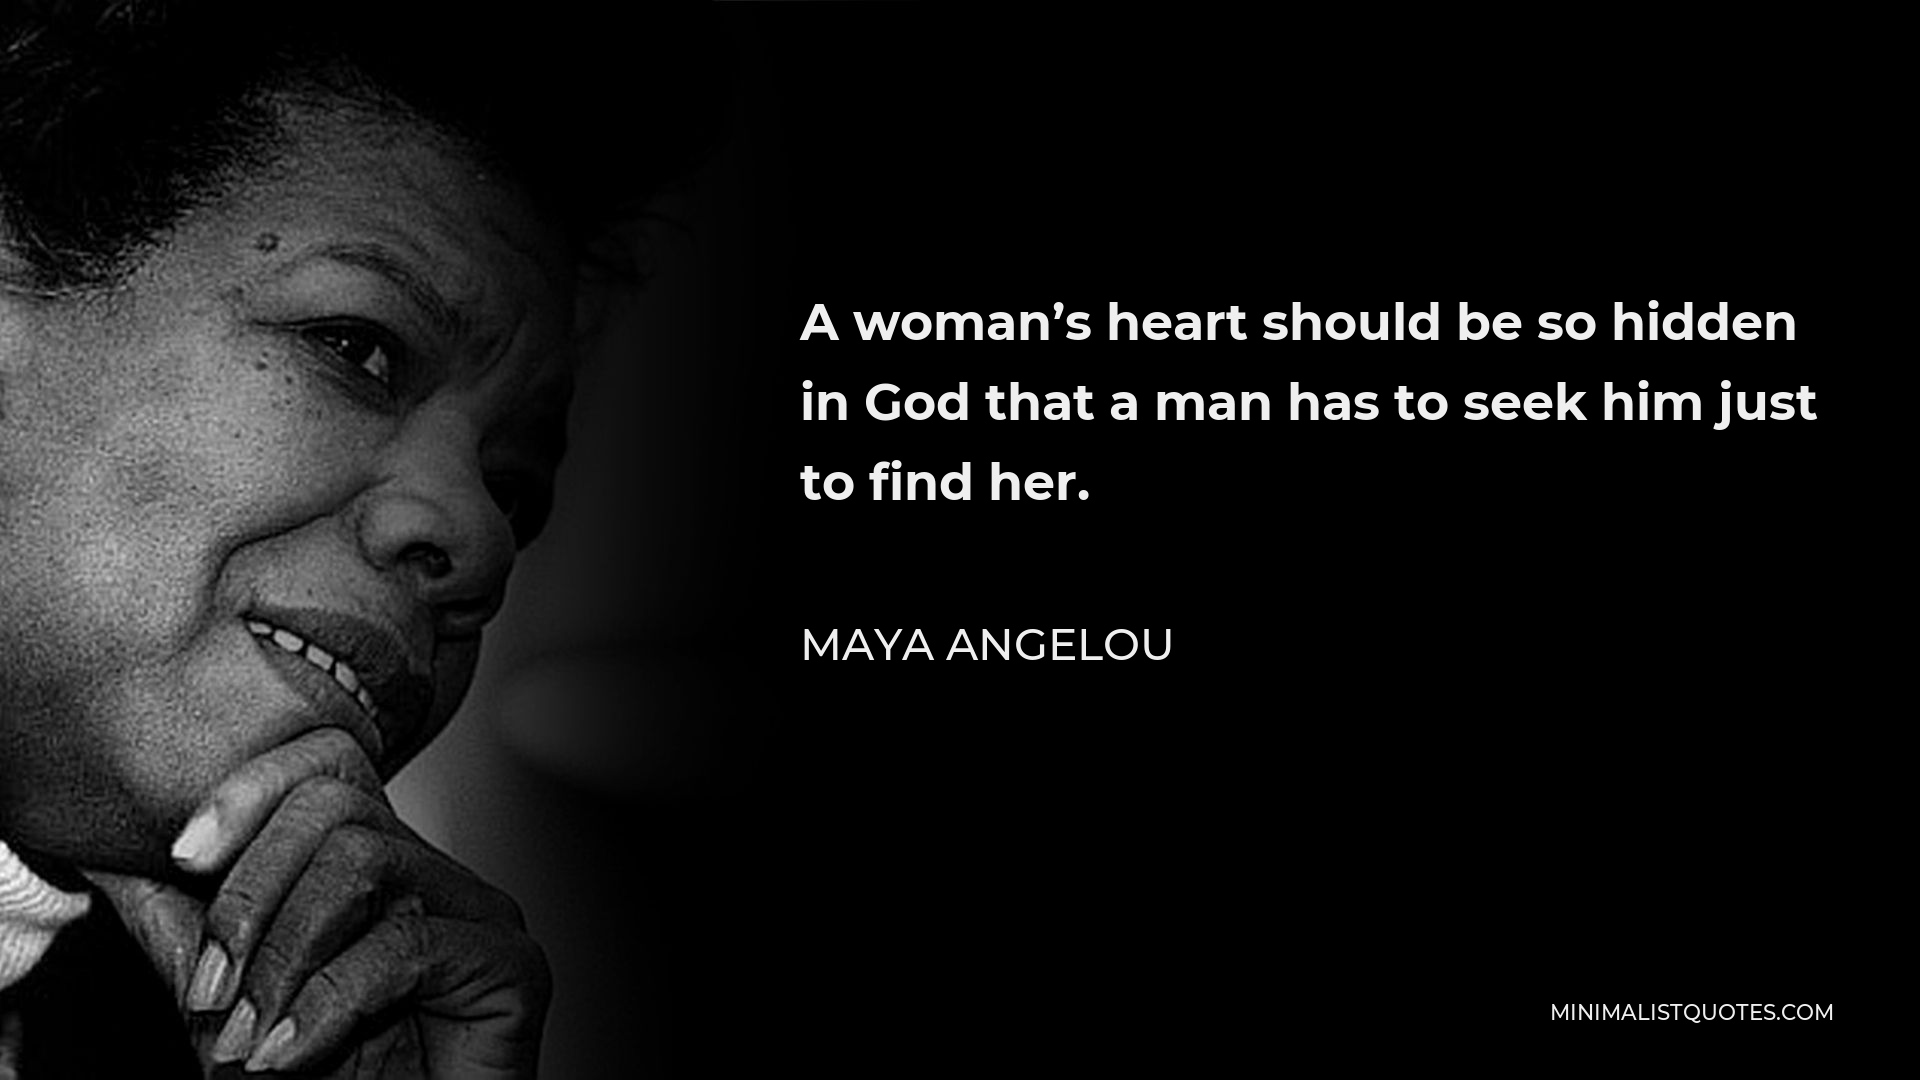 Maya Angelou Quote - A woman’s heart should be so hidden in God that a man has to seek him just to find her.